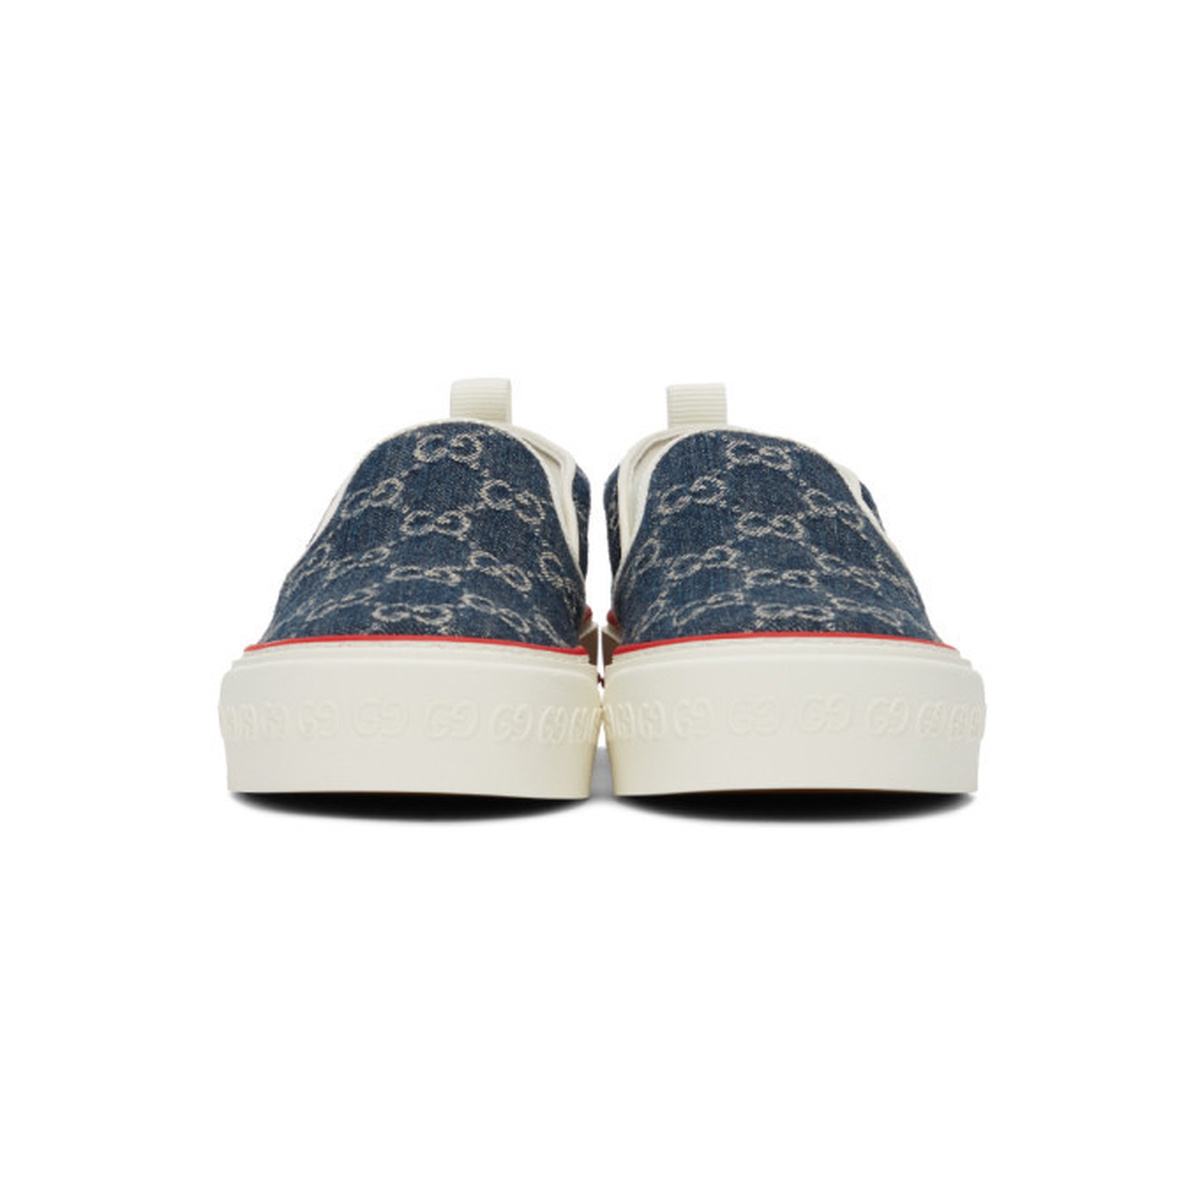 Gucci Tennis 1977 Slip-on Sneakers in Blue for Men